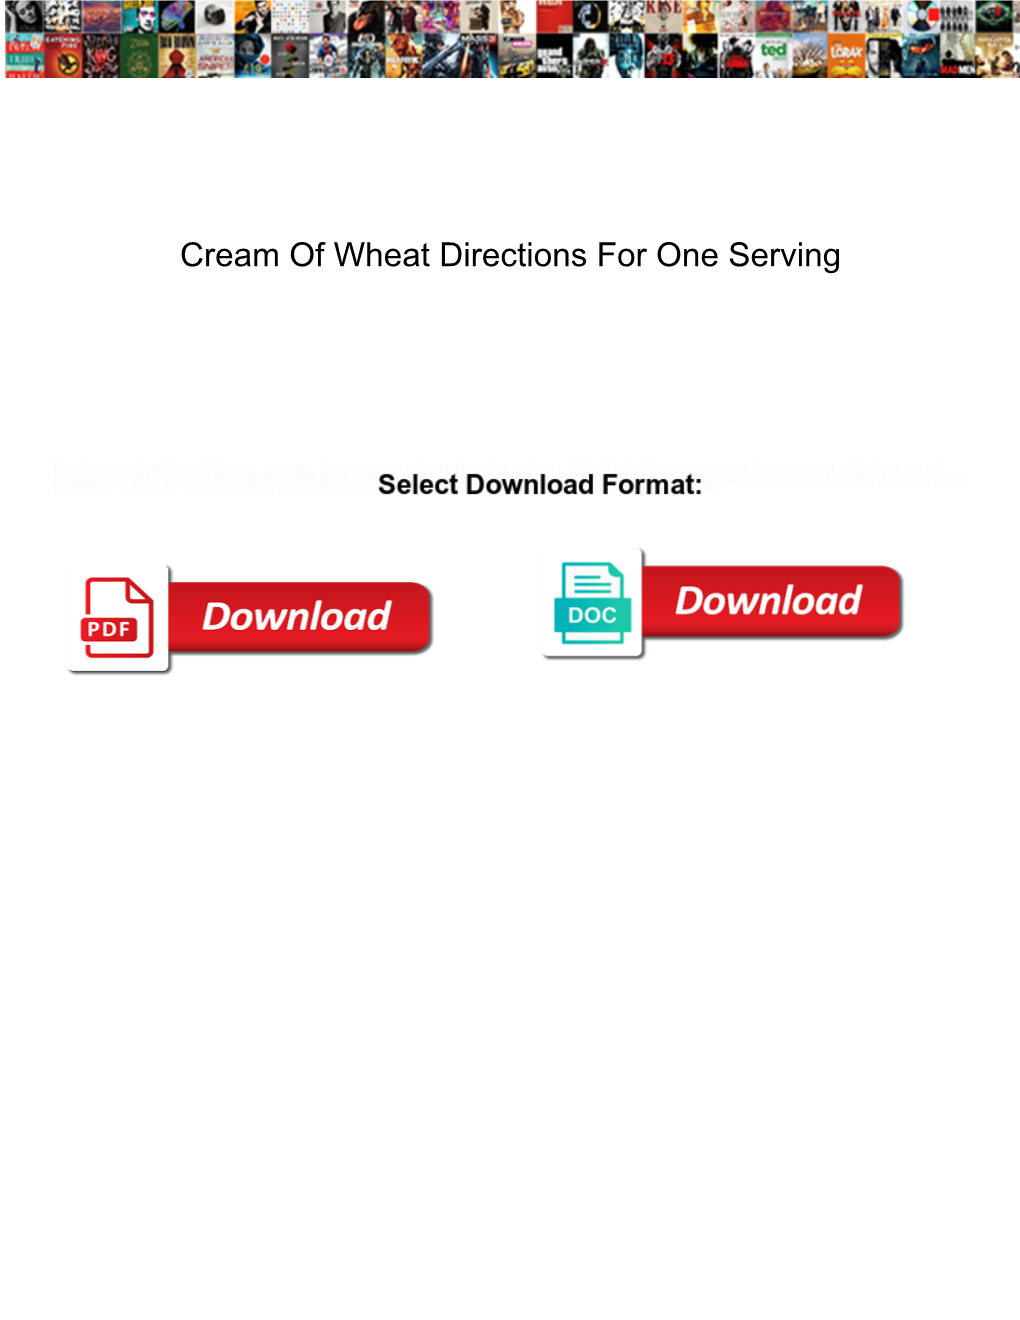 Cream of Wheat Directions for One Serving